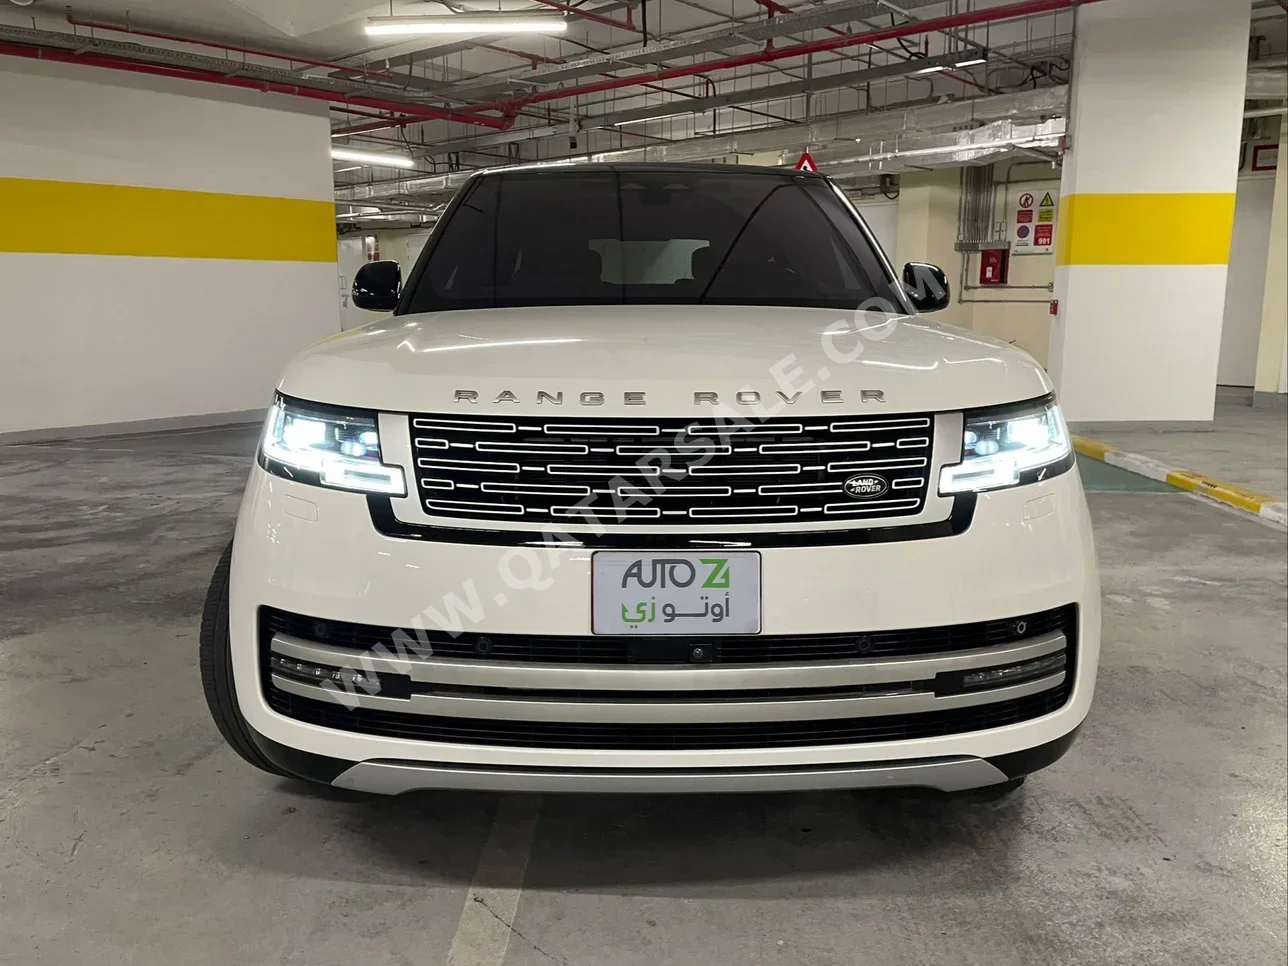 Land Rover  Range Rover  Vogue  Autobiography  2022  Automatic  35,000 Km  8 Cylinder  Four Wheel Drive (4WD)  SUV  White  With Warranty